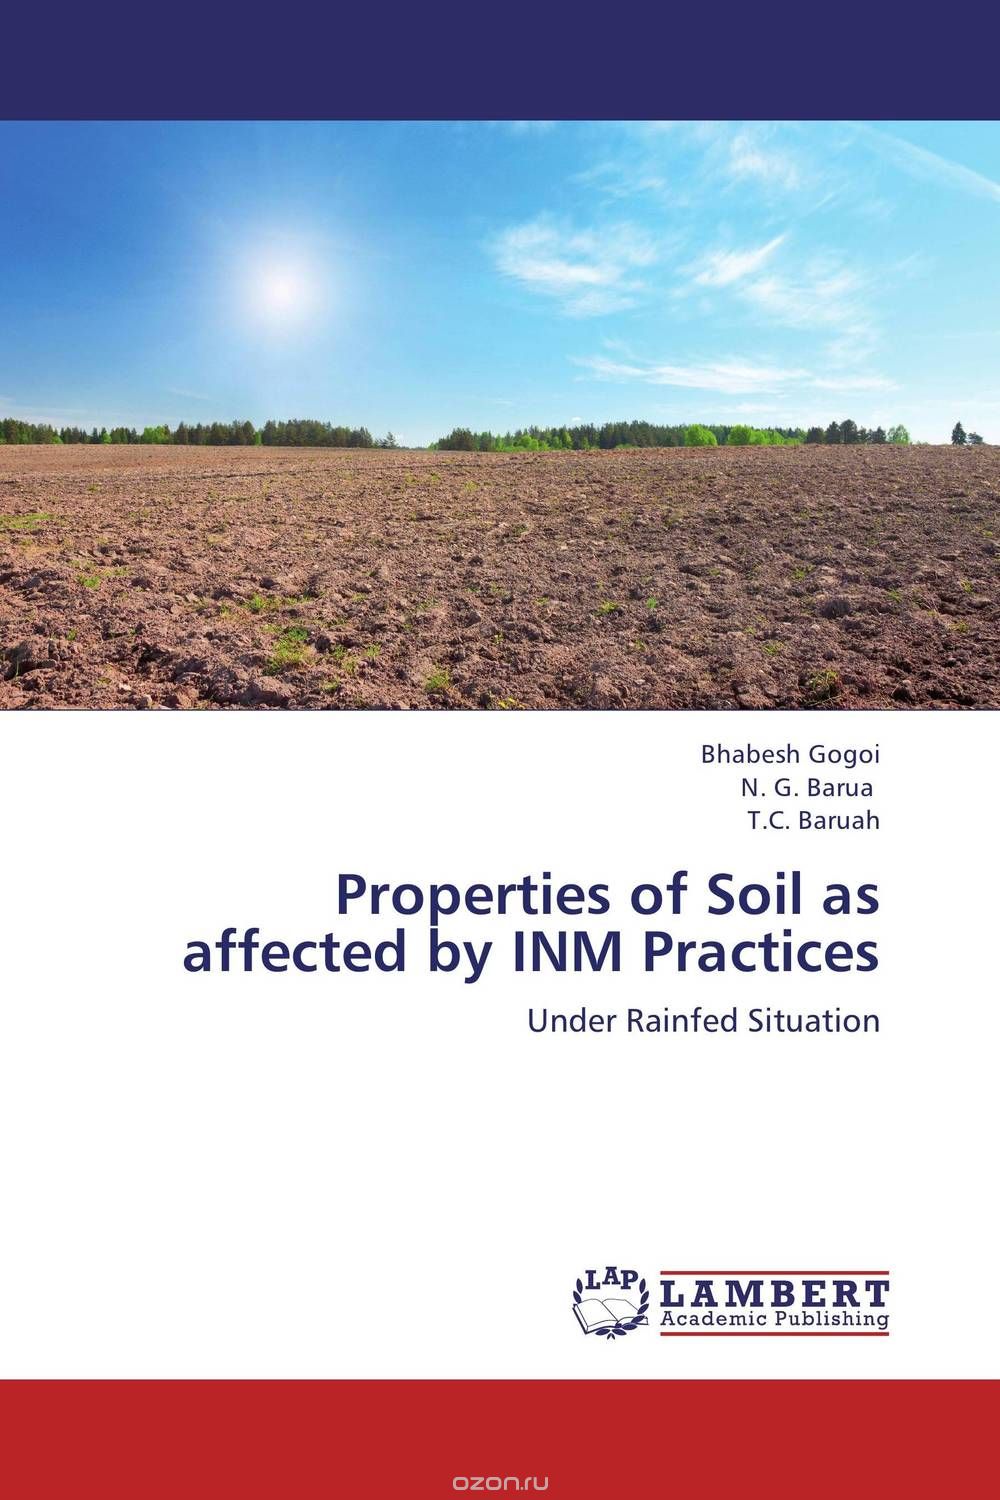 Скачать книгу "Properties of Soil as affected by INM Practices"